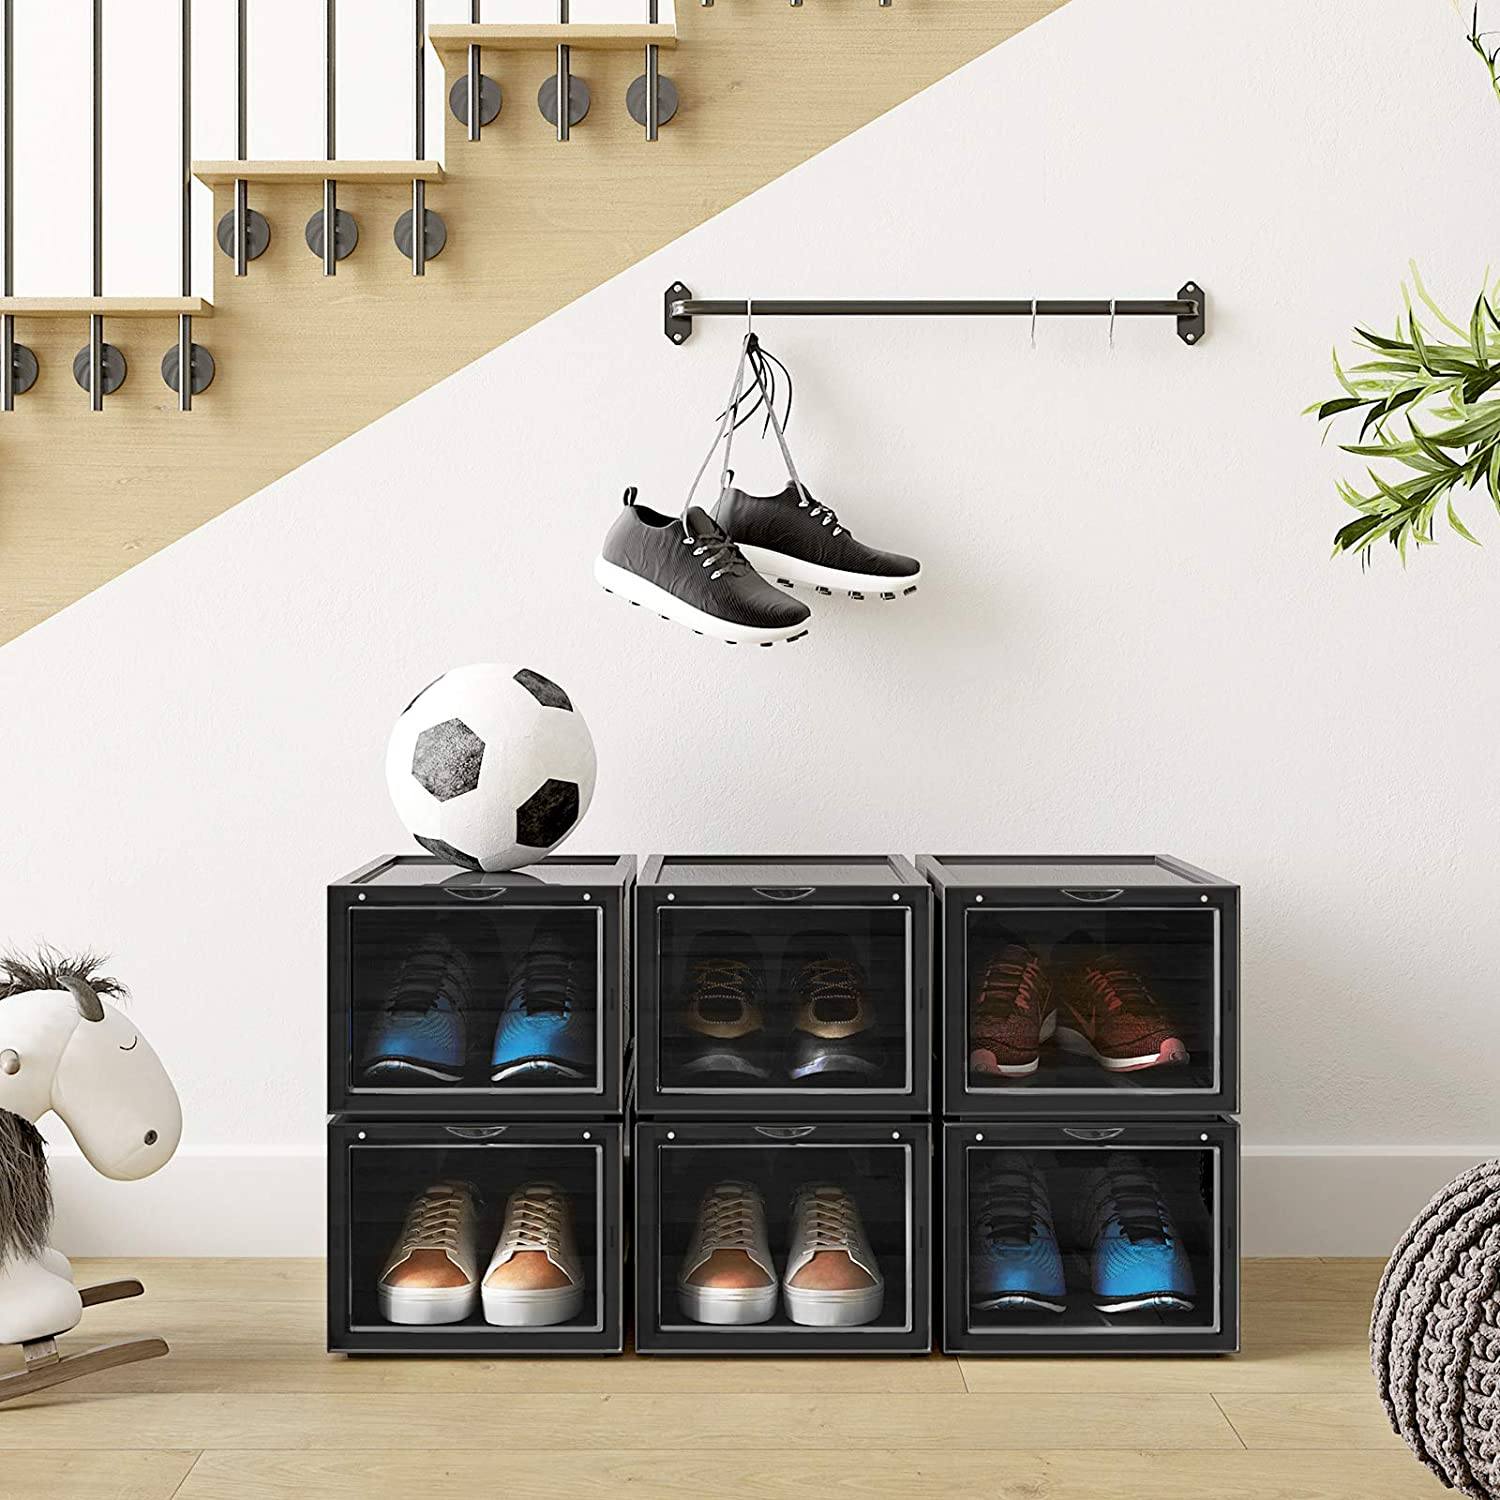 Shoe Box, Stackable Shoe Organiser, Plastic Shoe Storage with Clear Door, Easy to Assemble, Set of 6, 28 x 36 x 22 cm, Sizes up to UK 11, Black LSP06BK RAW58.dk 